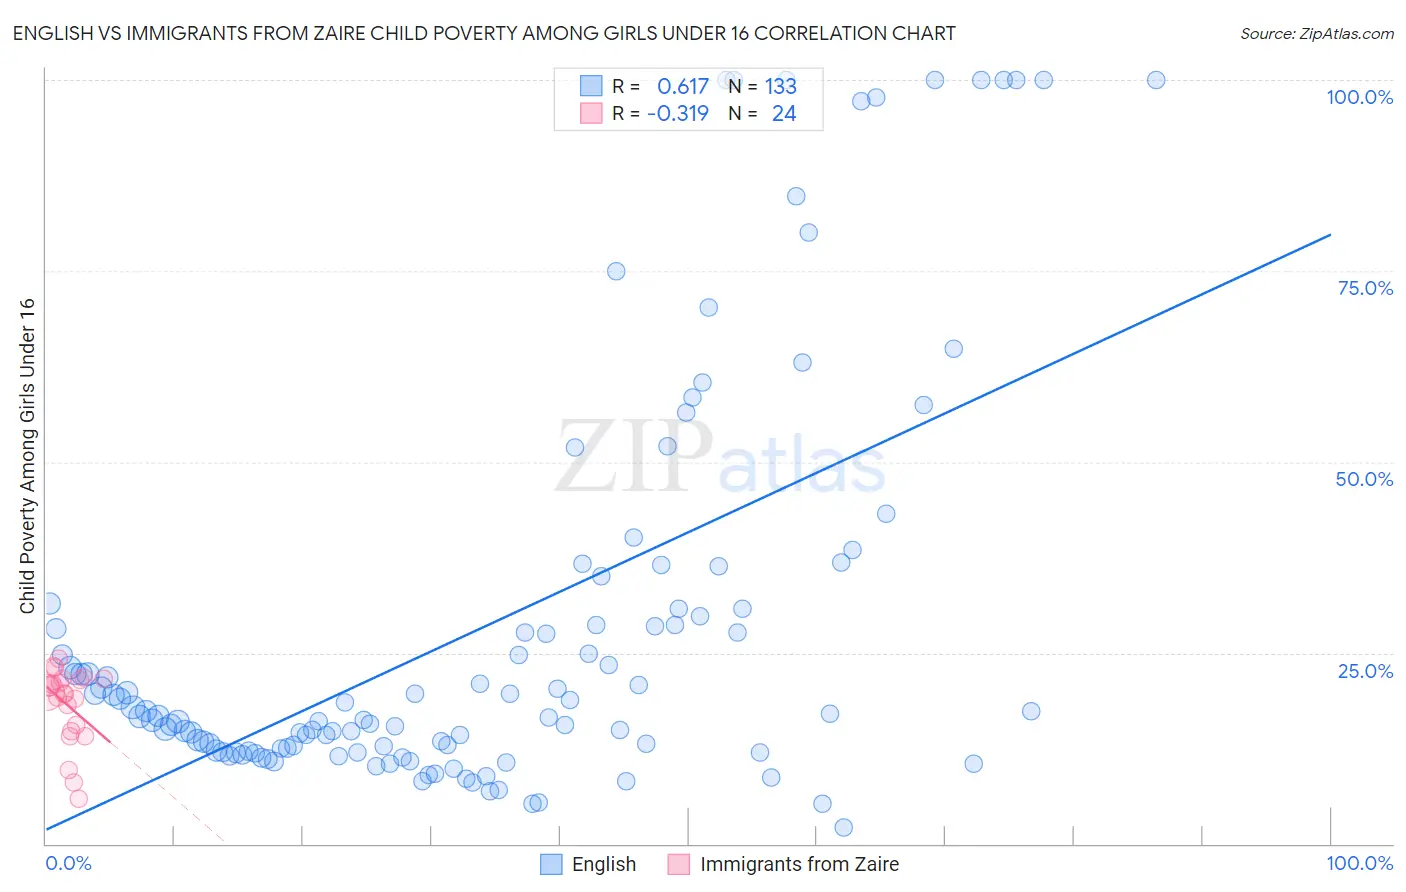 English vs Immigrants from Zaire Child Poverty Among Girls Under 16